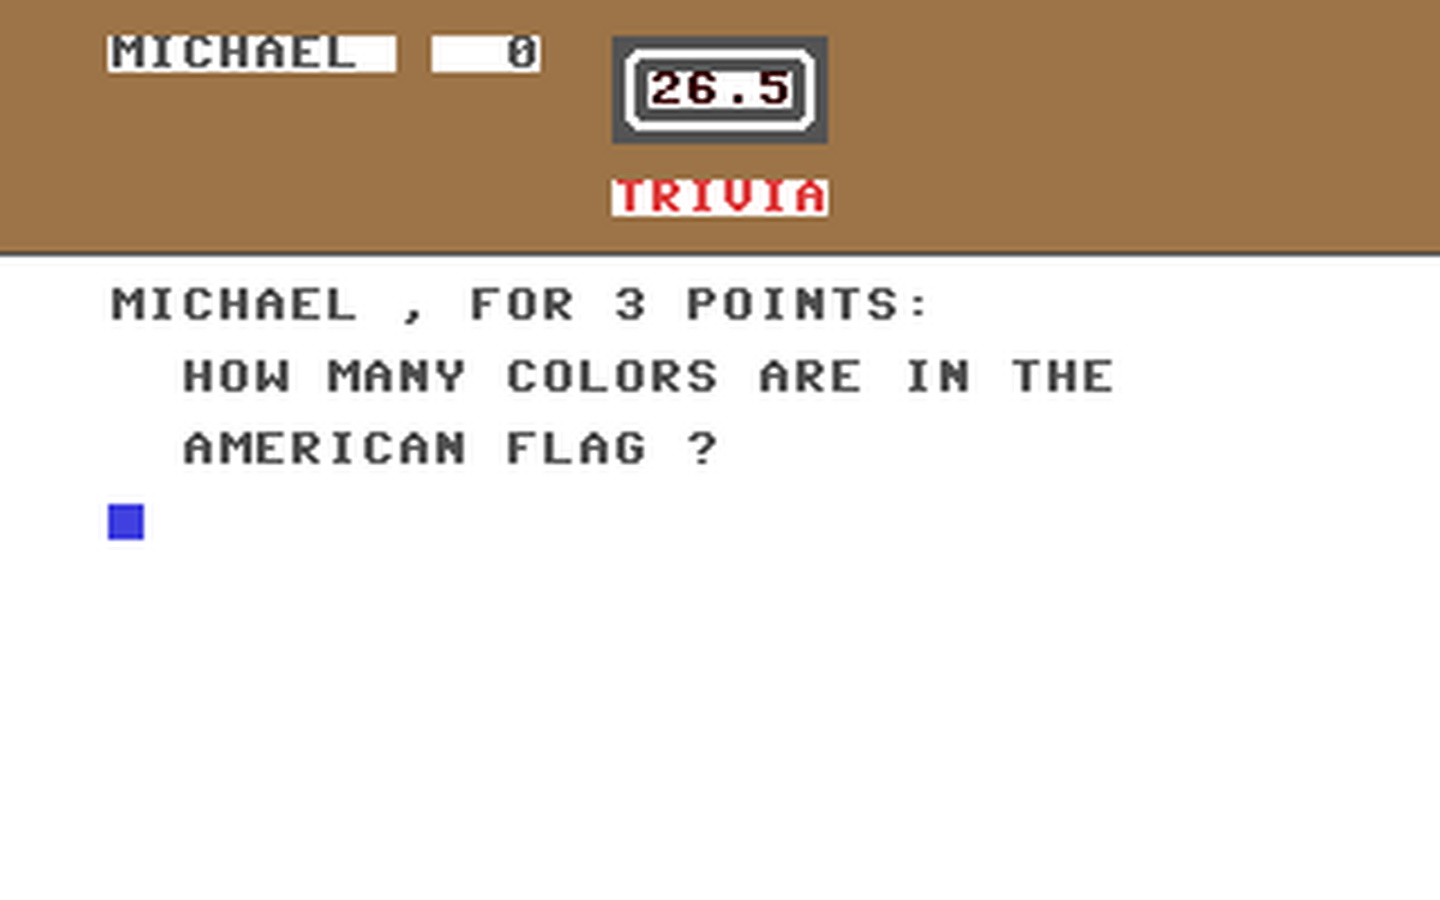 C64 GameBase Game_of_Trivia,_The_-_Children's_Trivia Cymbal_Software,_Inc. 1984